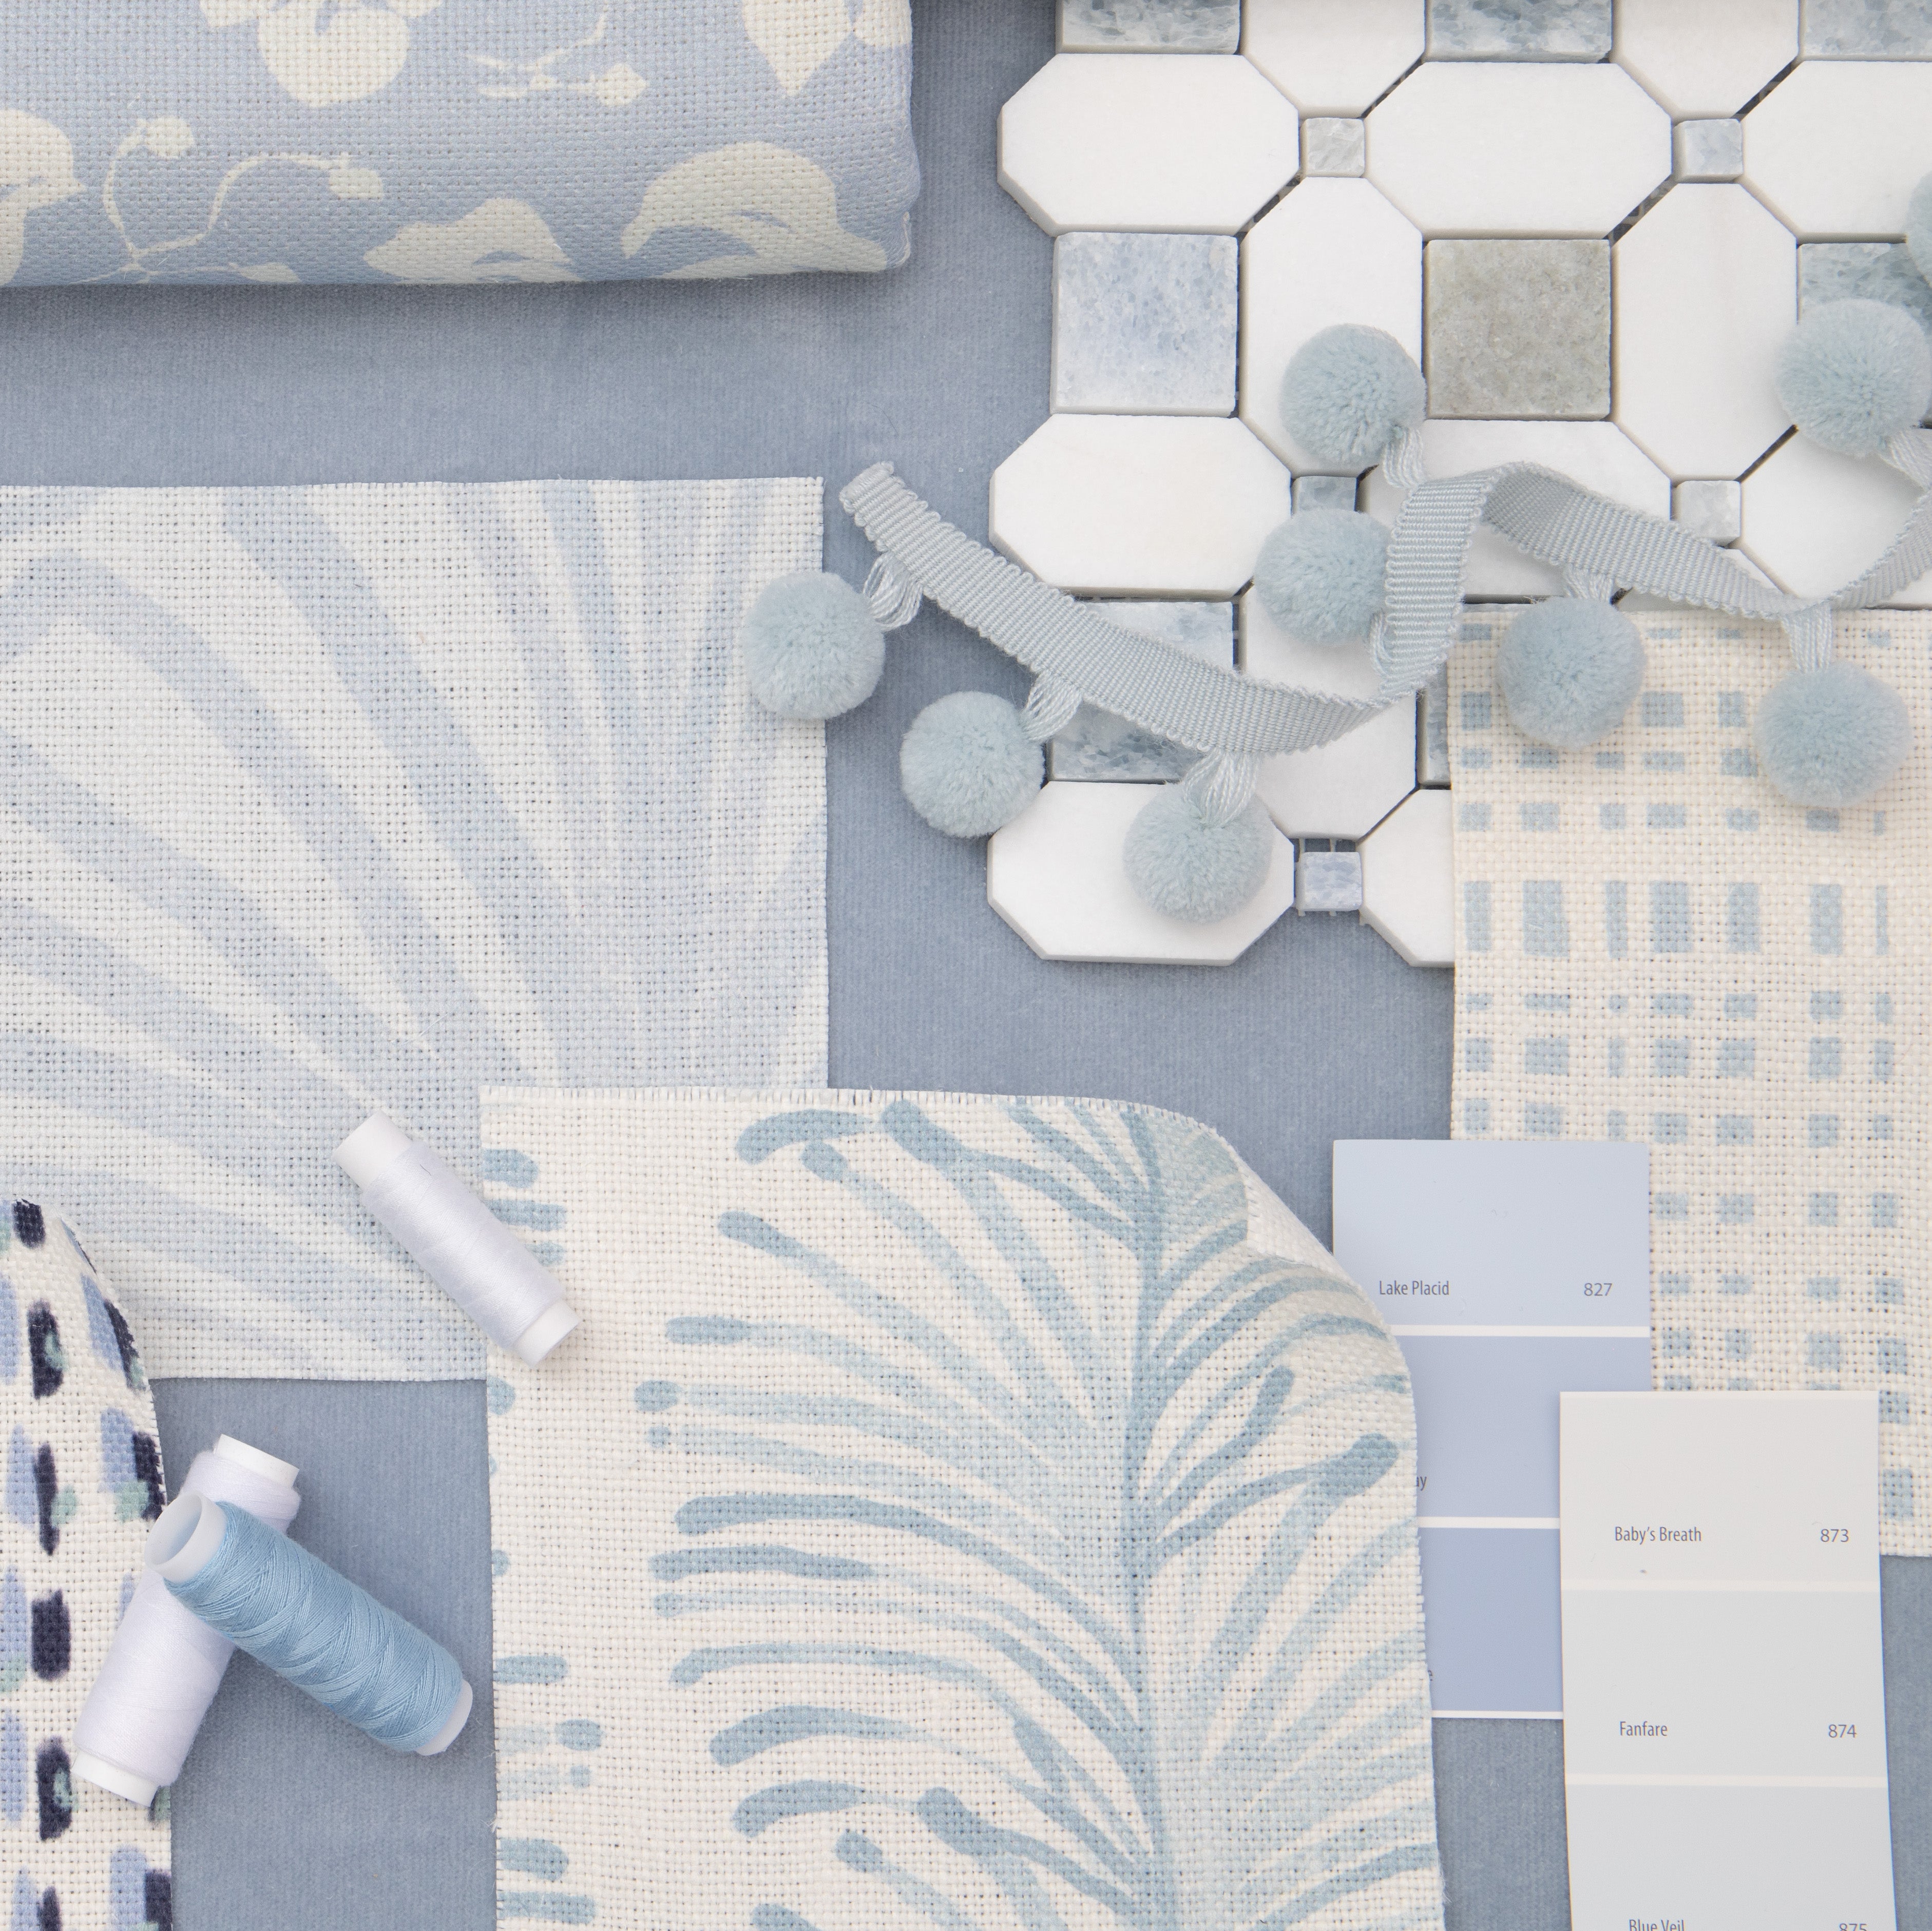 Interior design moodboard and fabric inspirations with Sky Blue Gingham Printed Swatch, Sky Blue Botanical Stripe Printed Swatch, and Sky and Navy Blue Poppy Printed Swatch